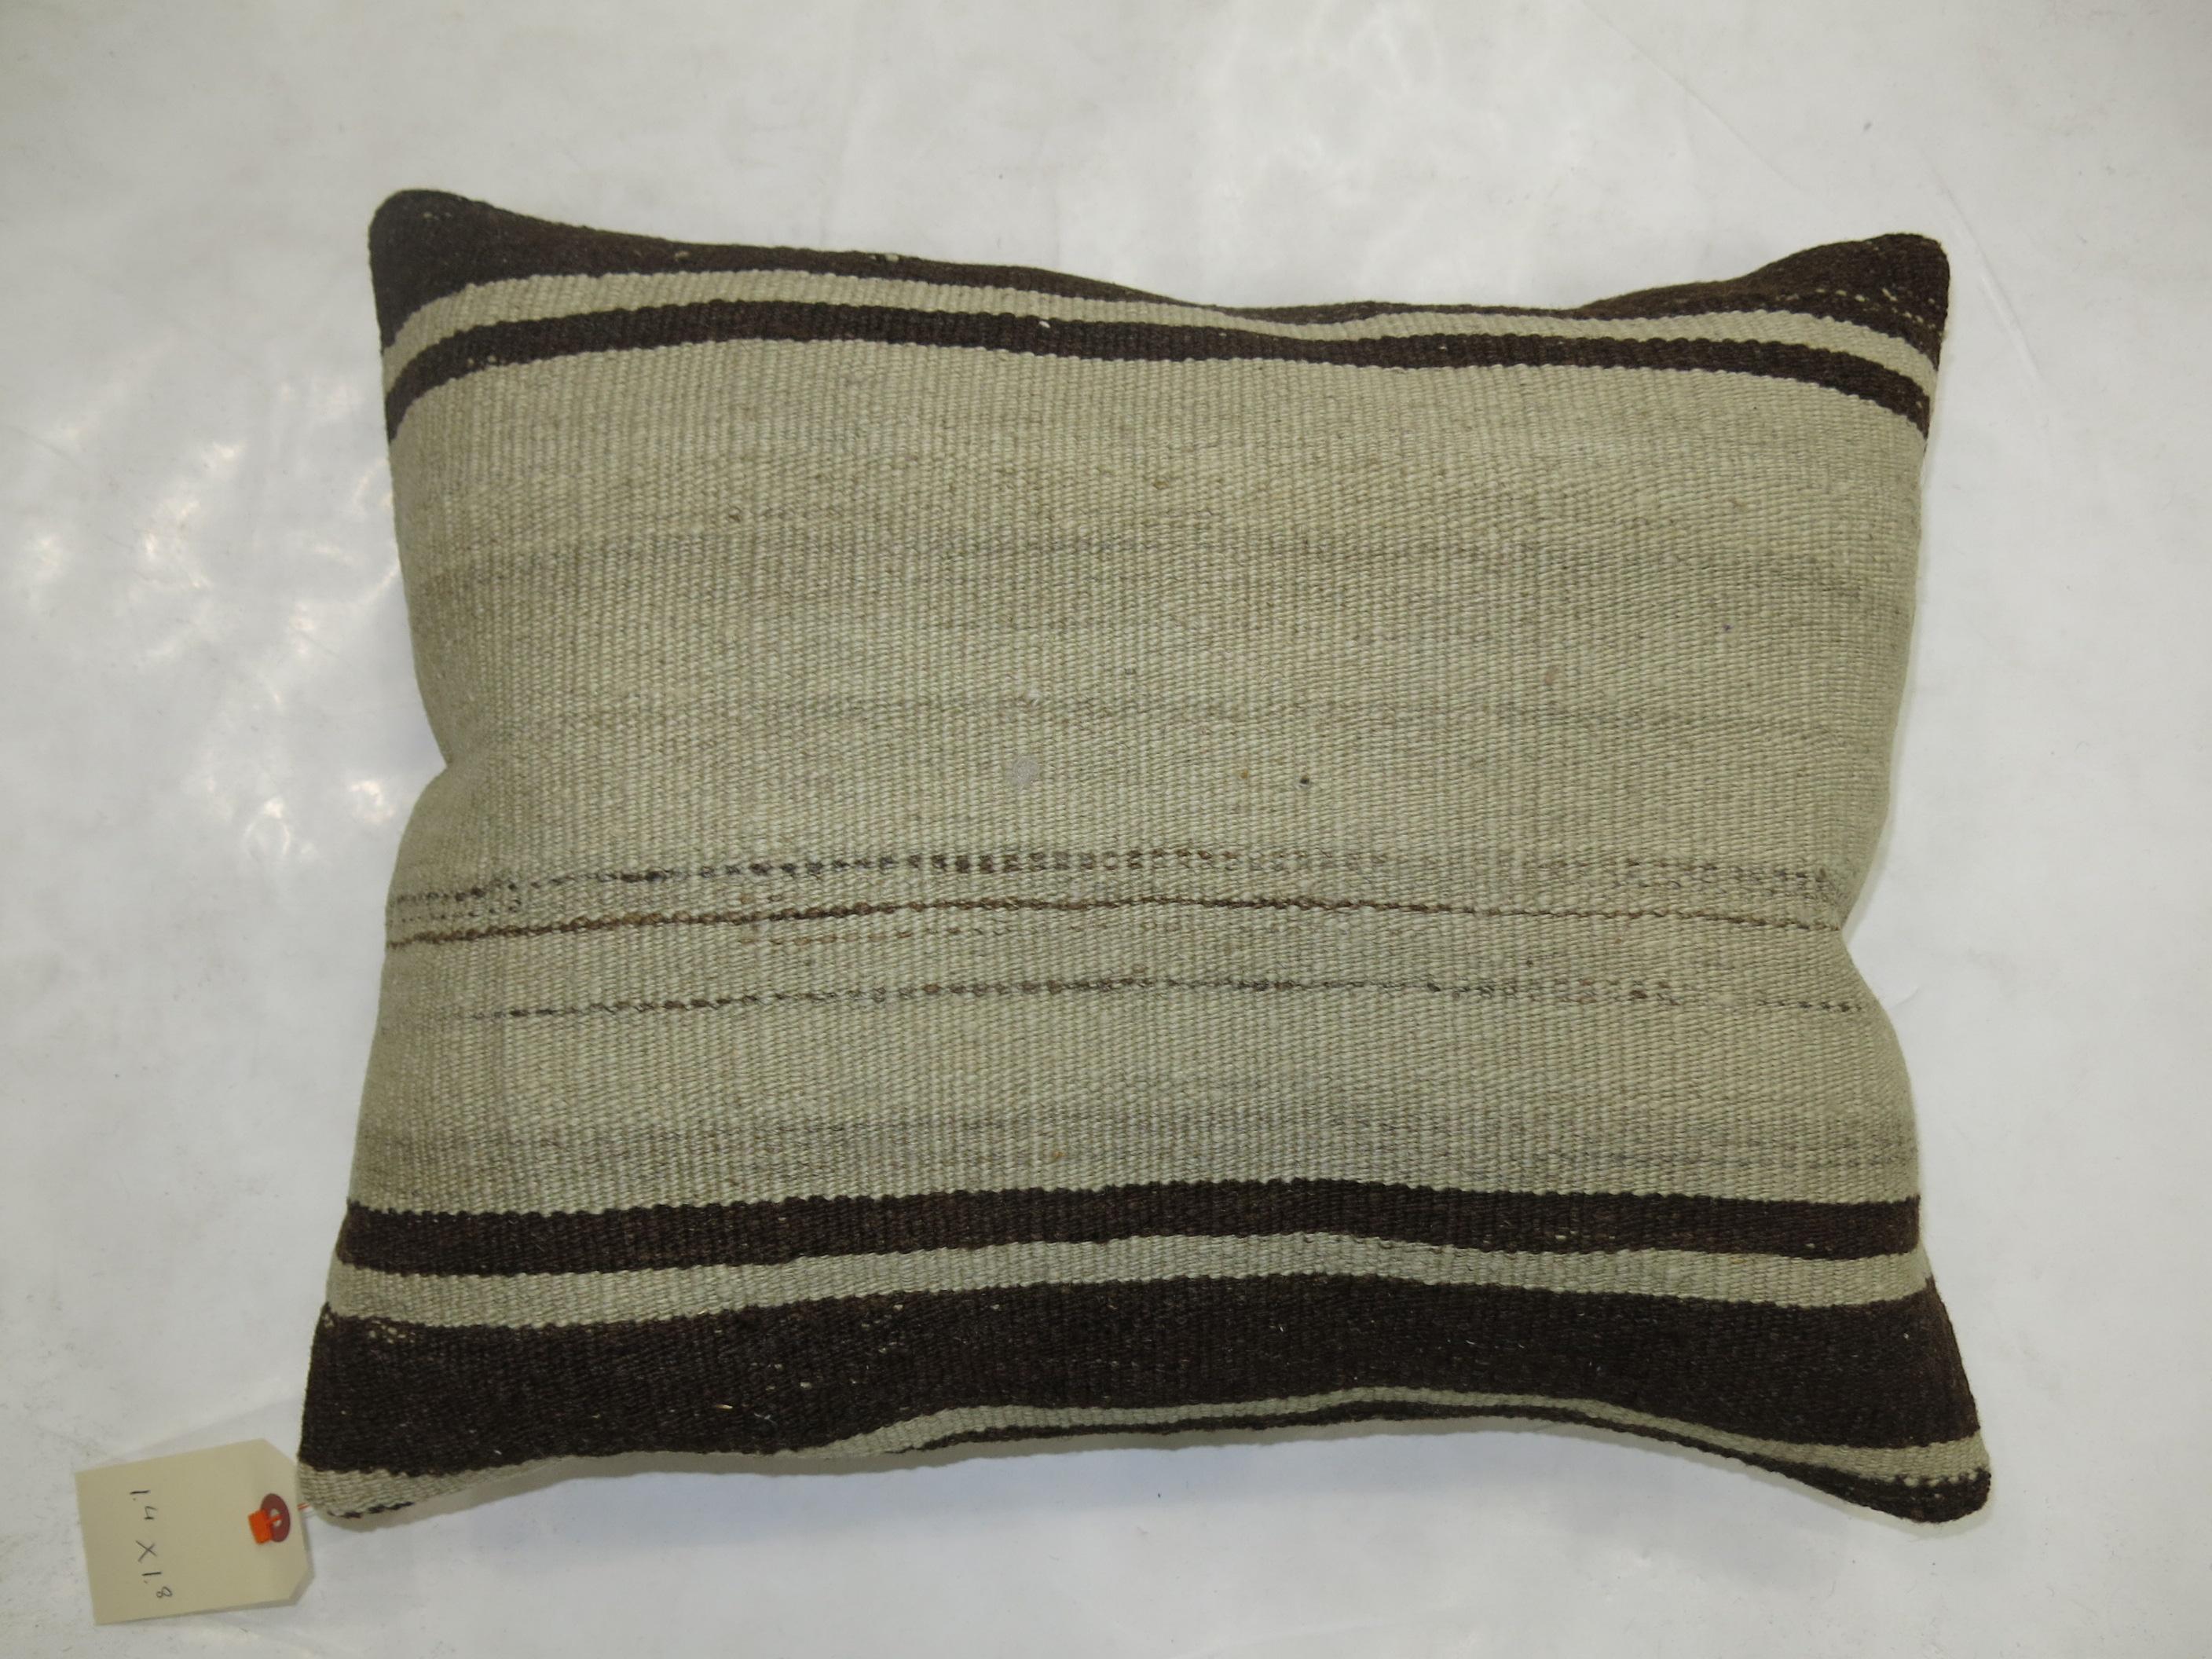 Pillow made from a vintage Turkish Kilim

Measures: 16'' x 20''.